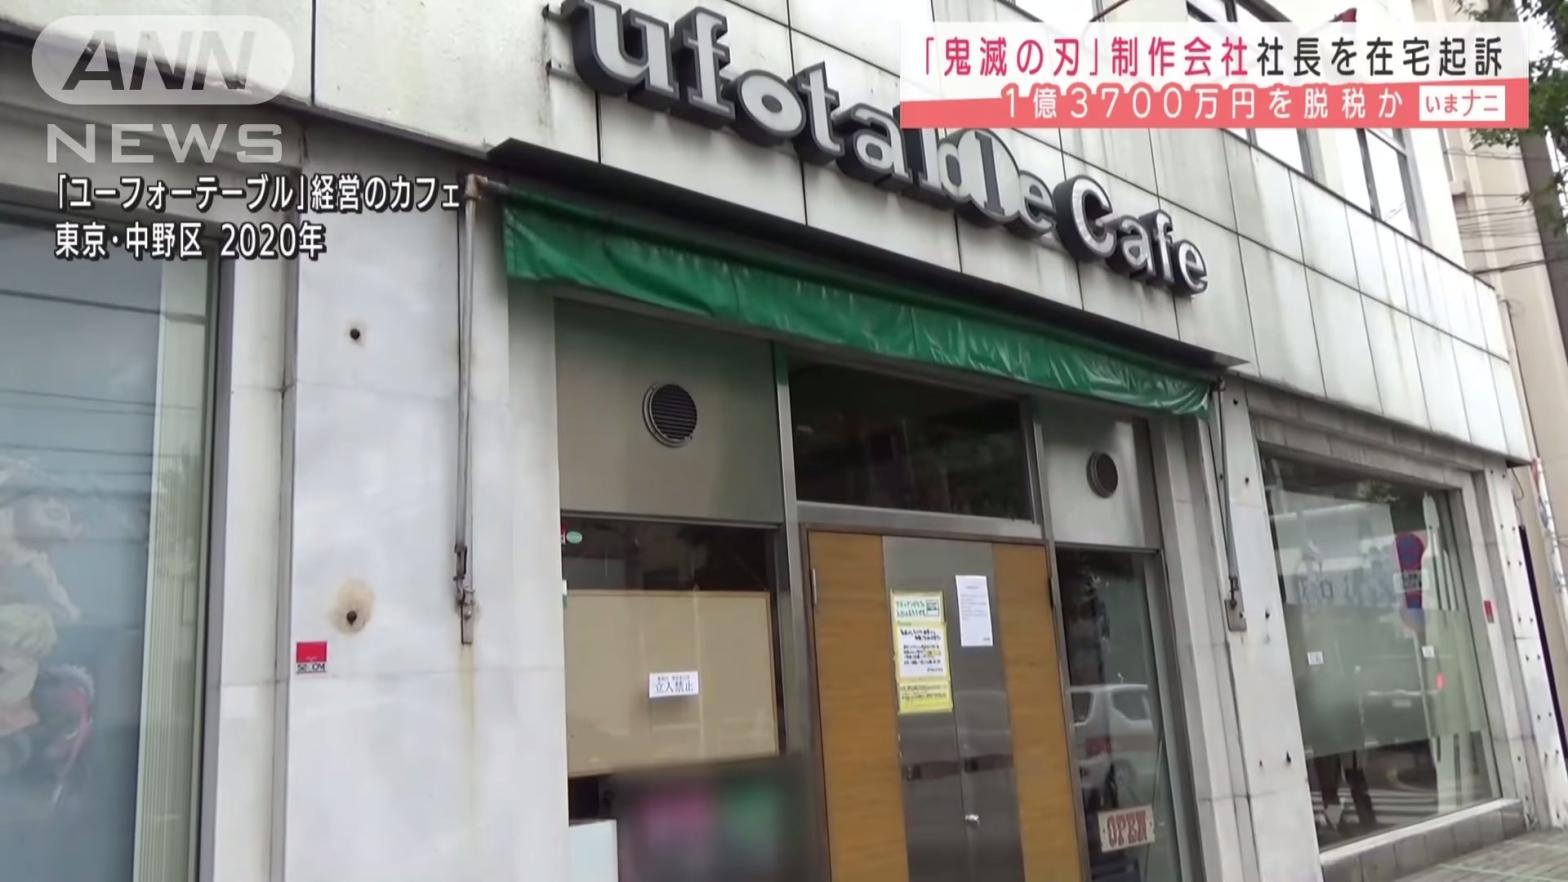 Ufotable's anime cafes were used for shady accounting practices.  (Screenshot: ANN News@YouTube)